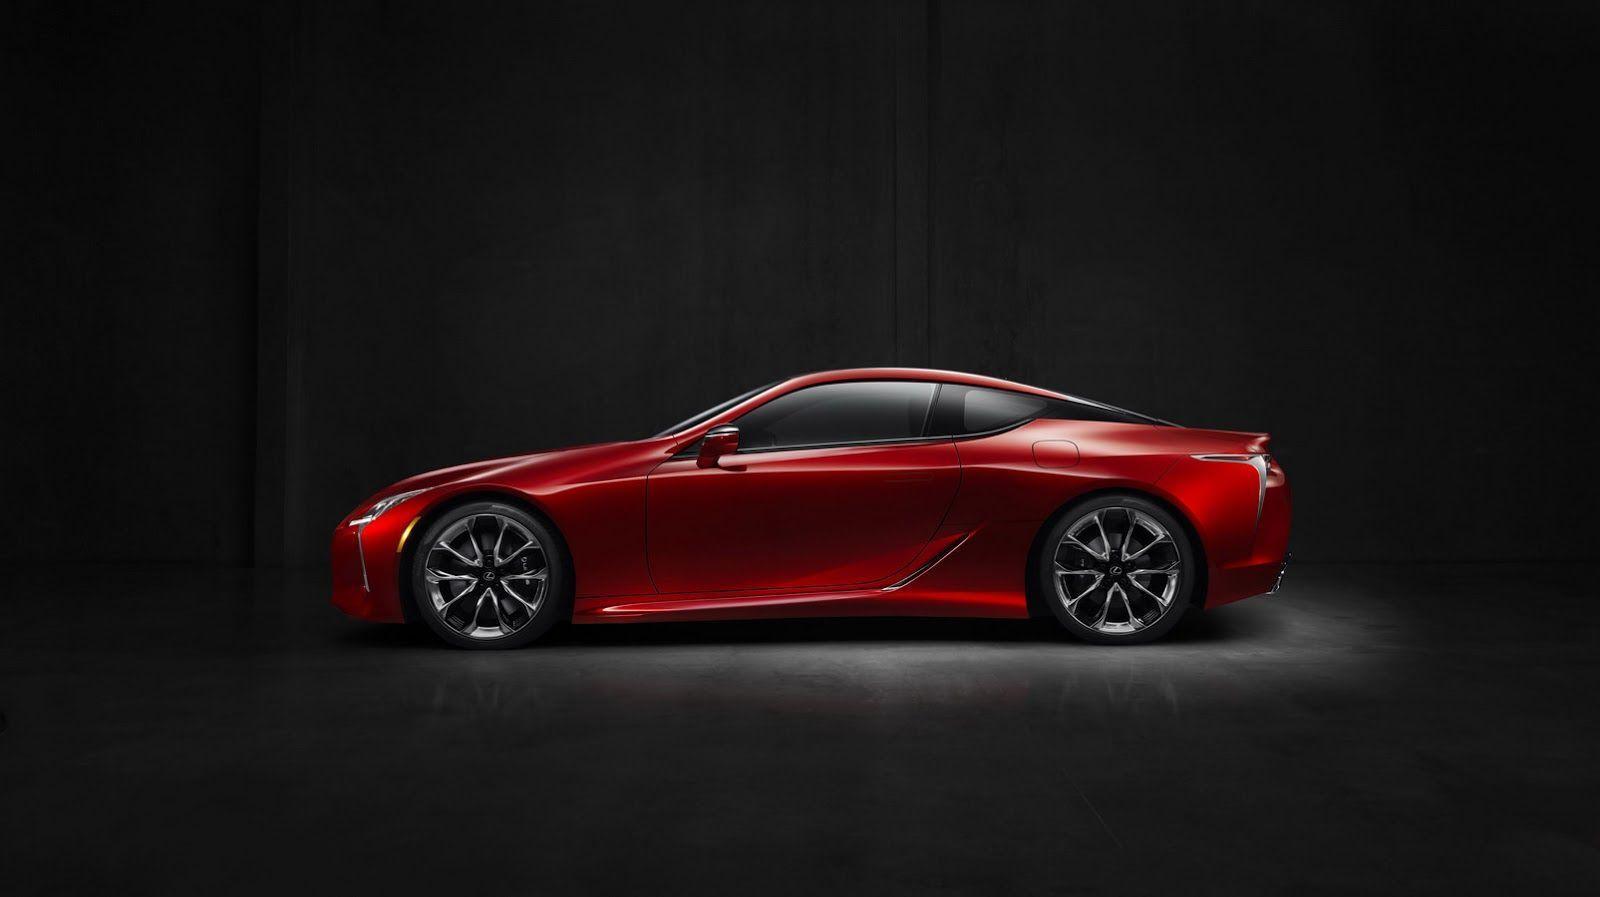 LC 500 With 467HP Is The Most Dynamic Lexus Since The LFA 51